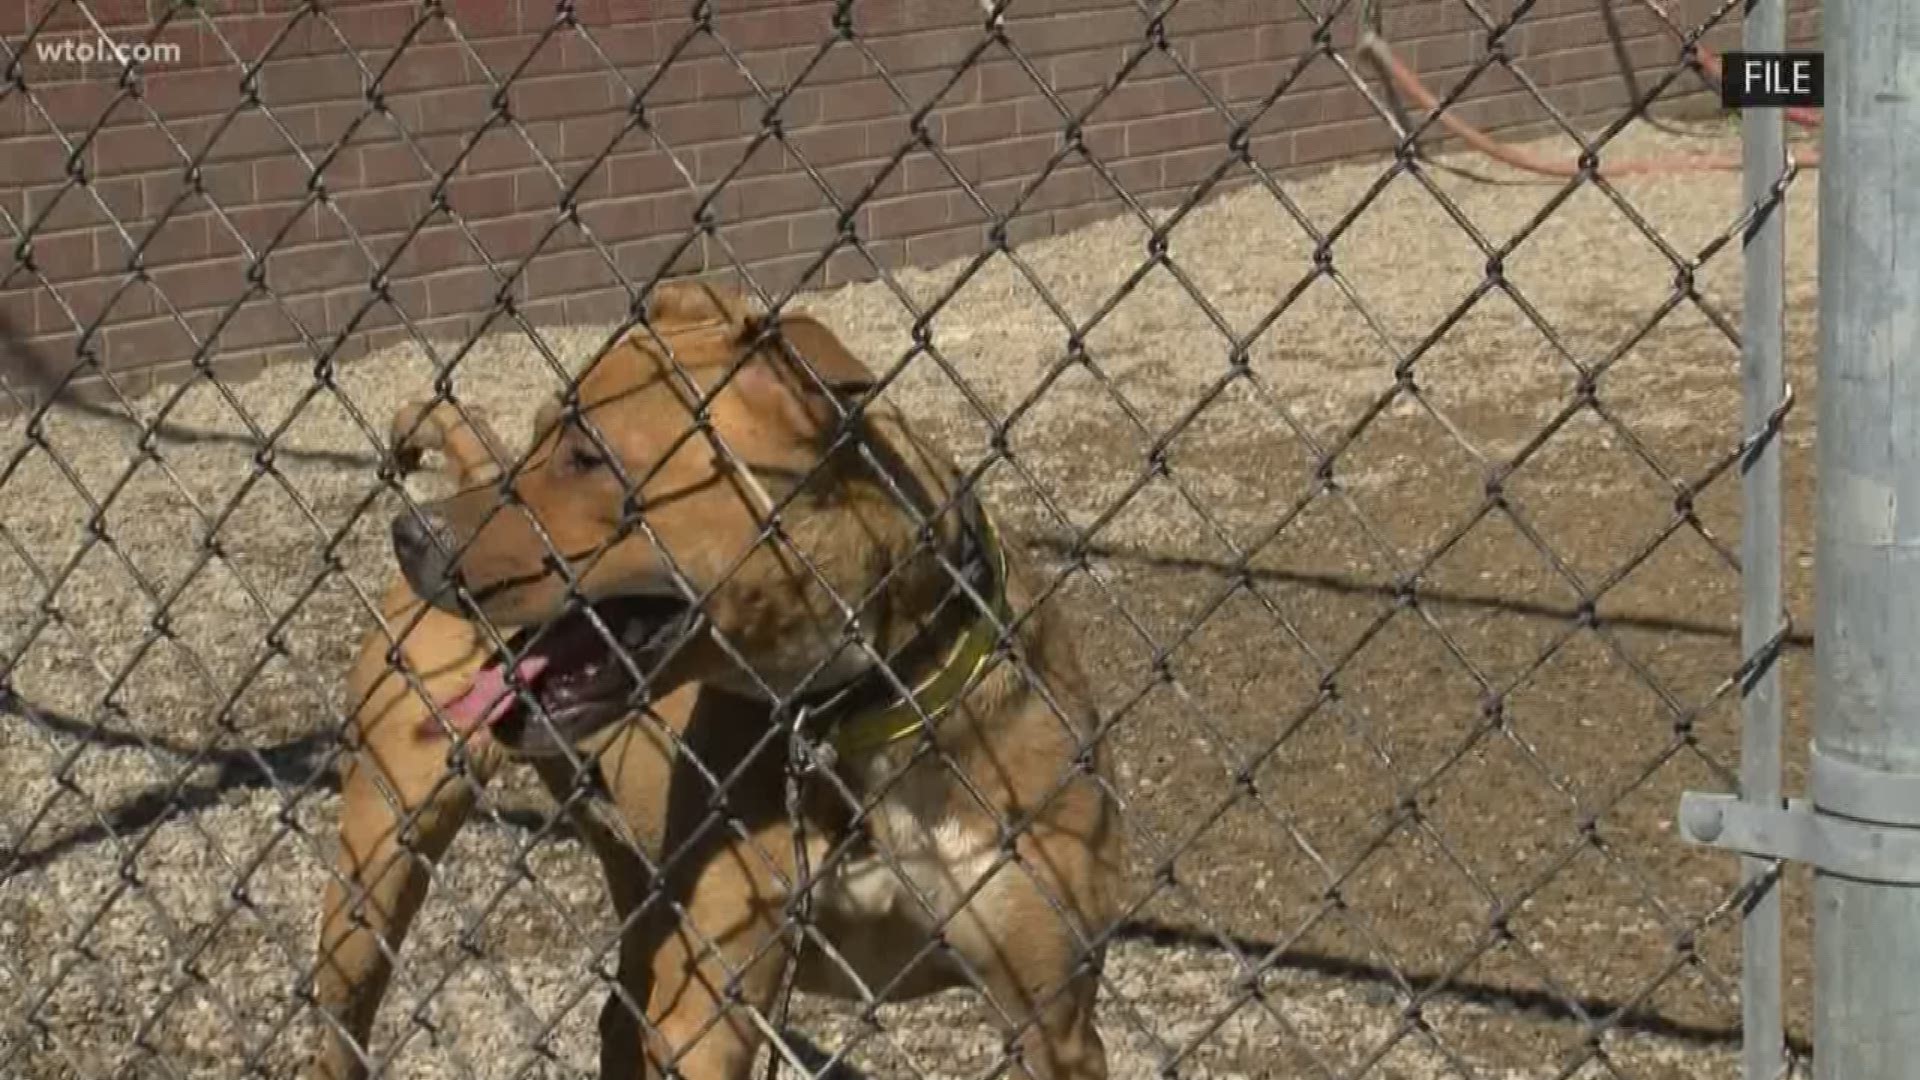 No arrests were made as a result of the searches, but numerous dogs were taken into custody.